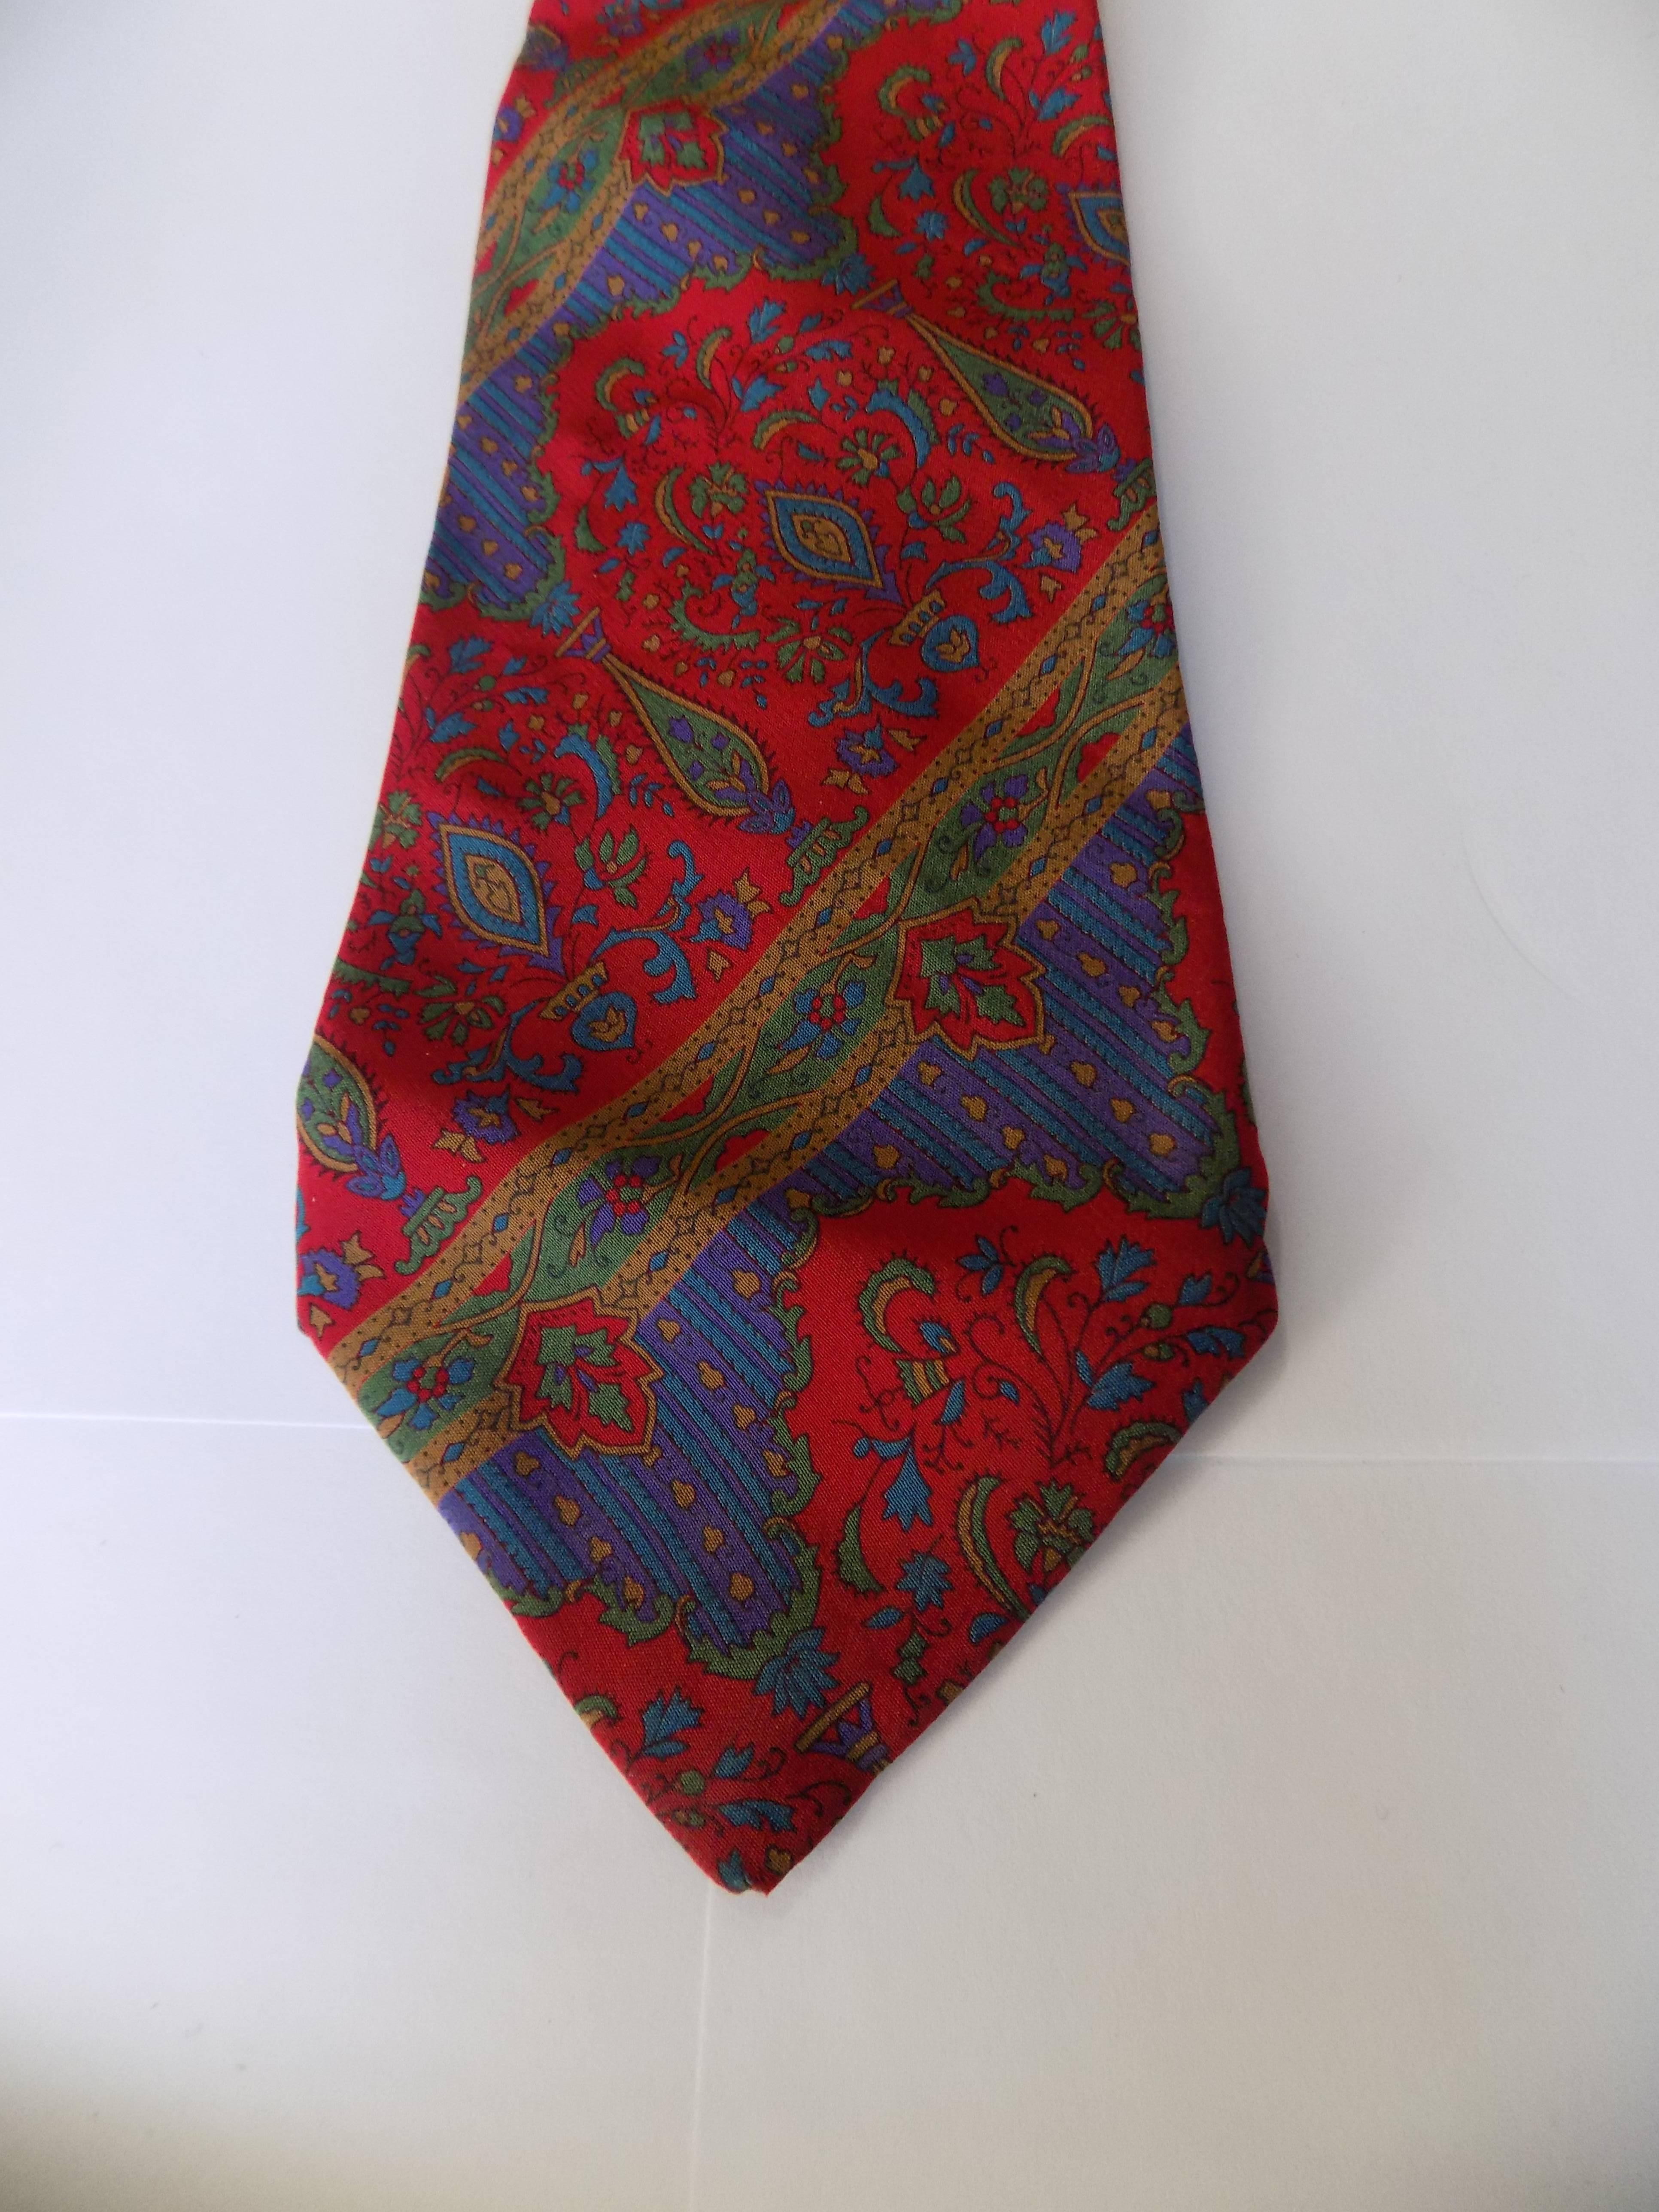 1980s Yves Saint Laurent multicolour tie

totally made in france
100% Silk